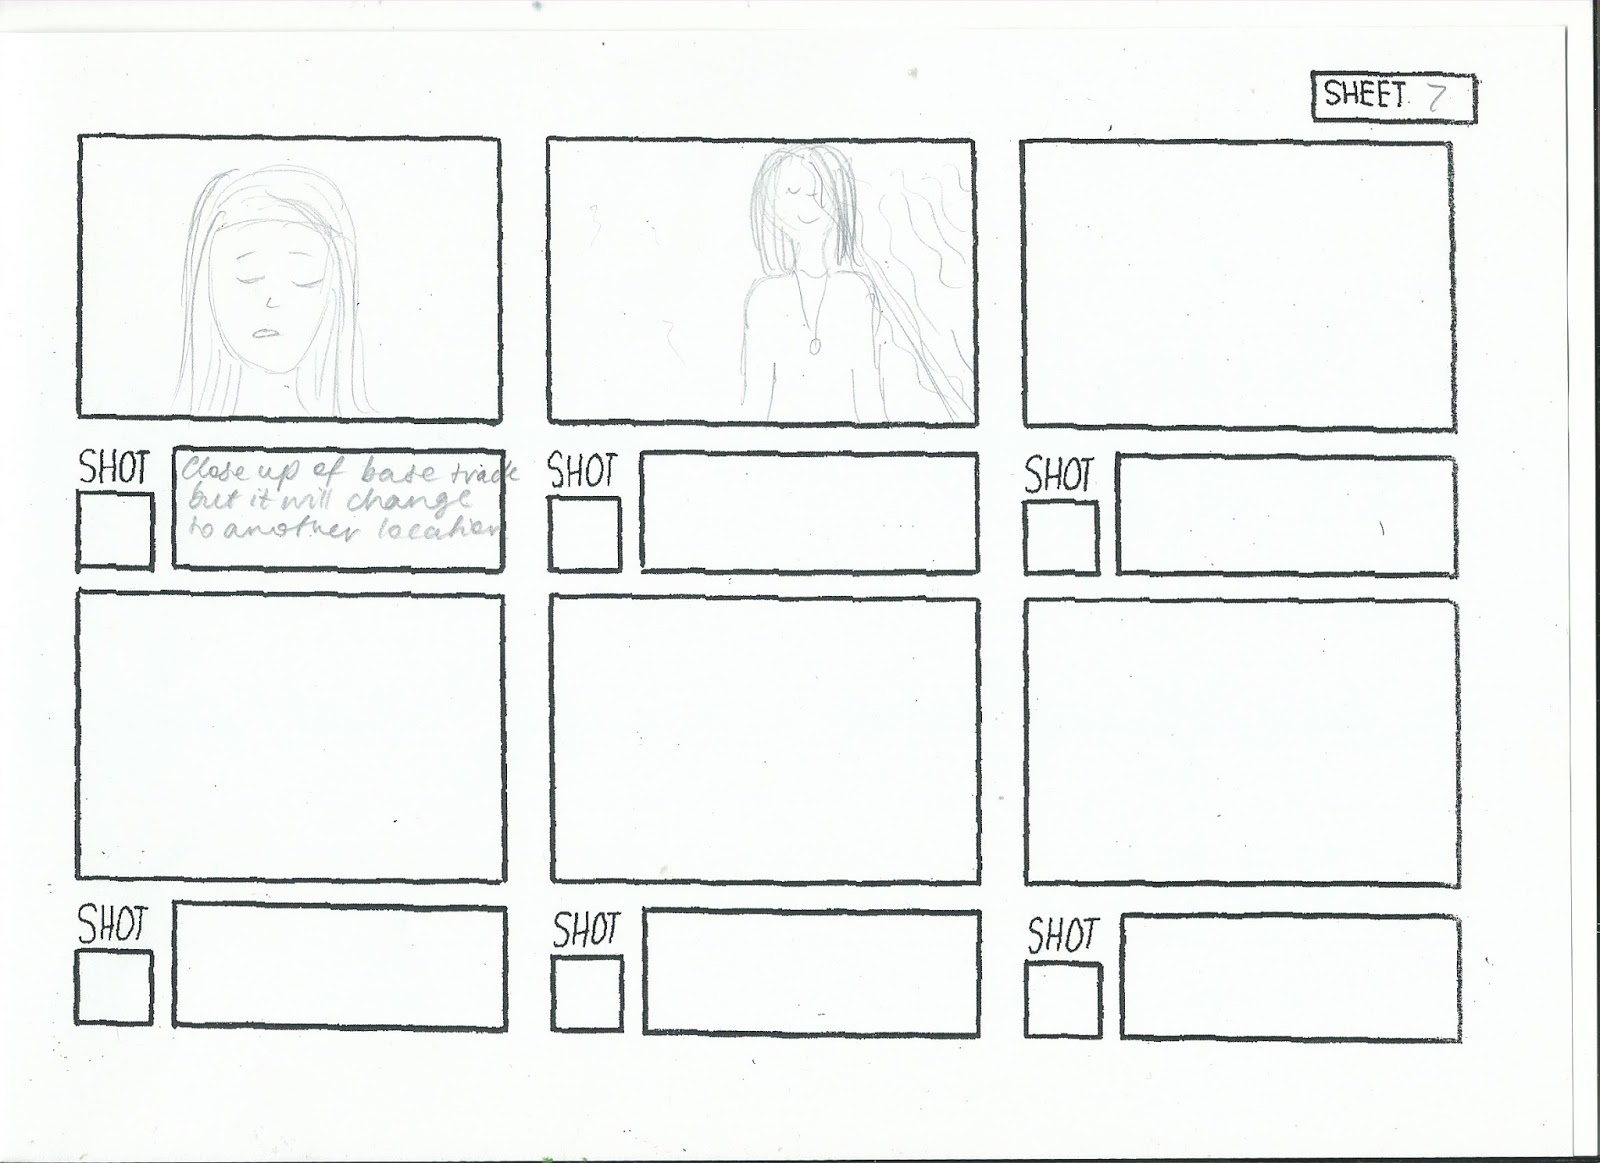 Group 12 Storyboard and Shot List